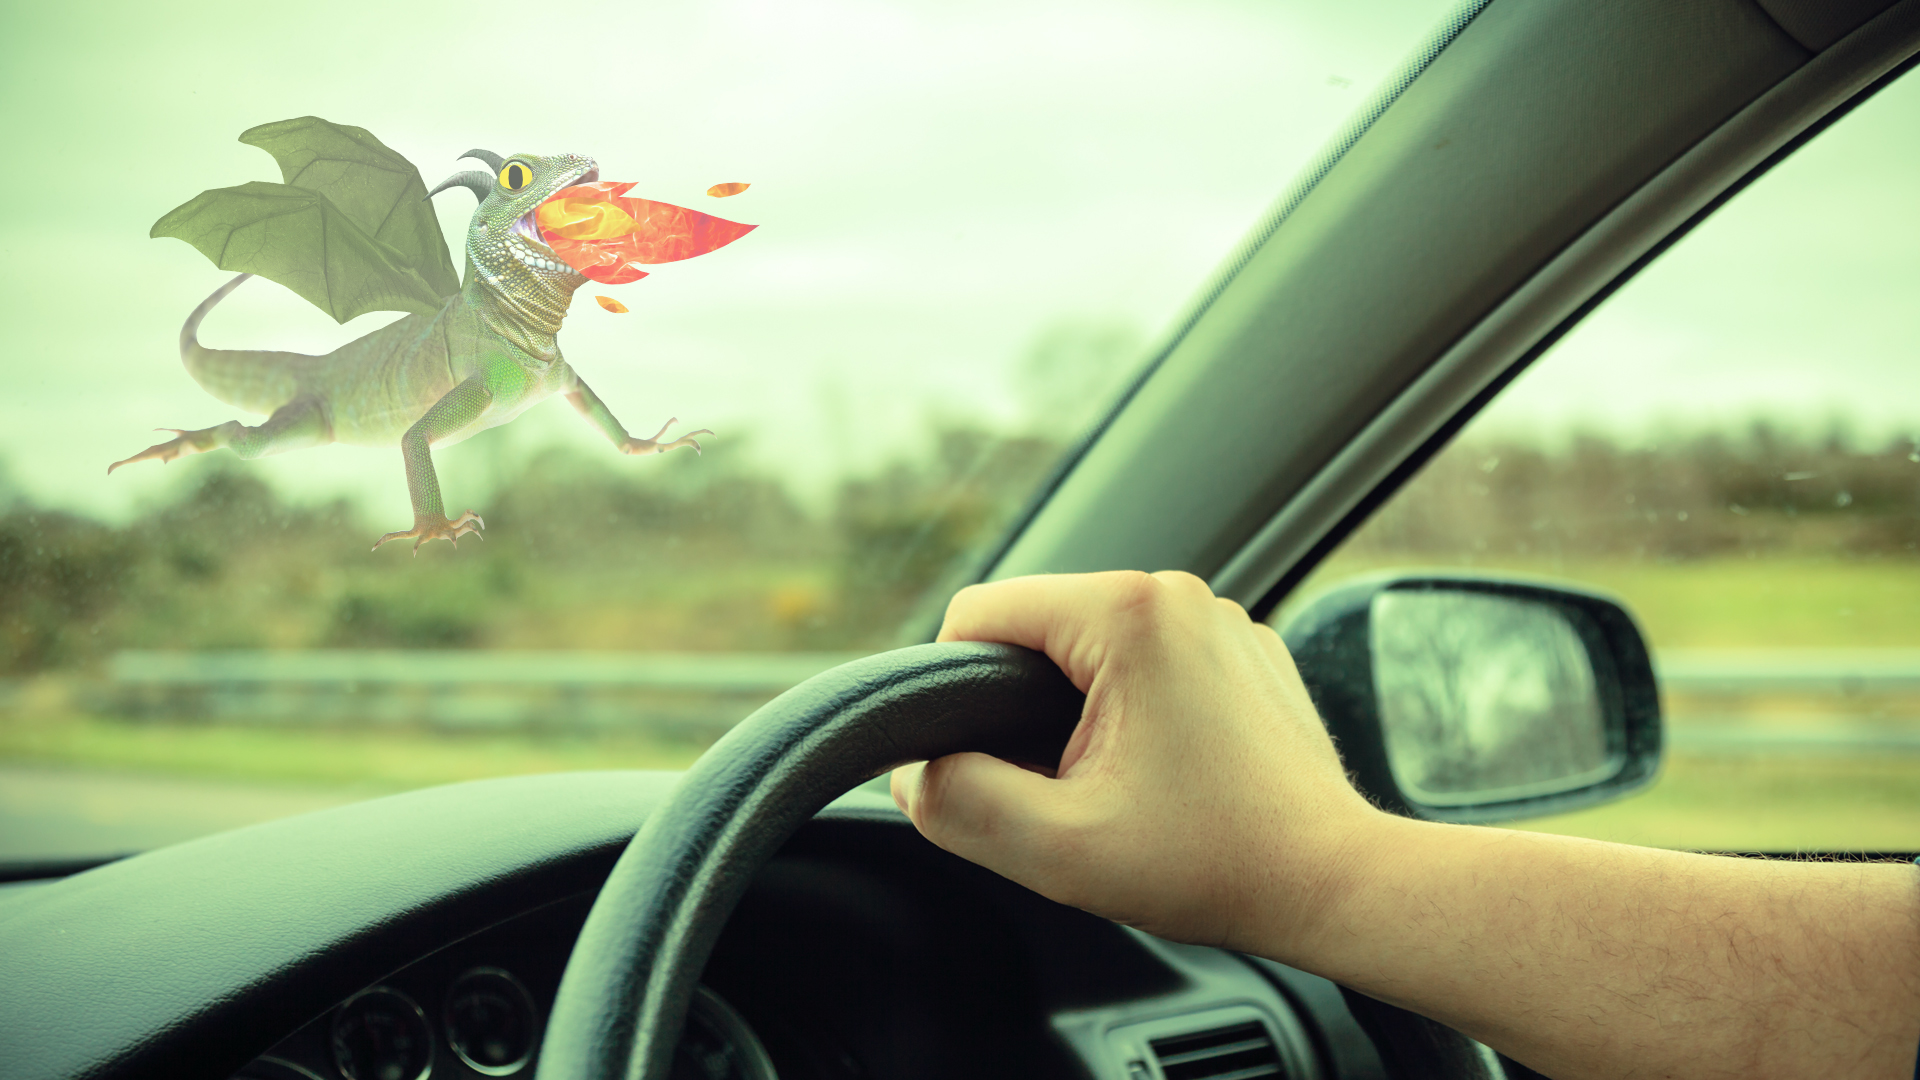 A car dashboard with a dragon in the background